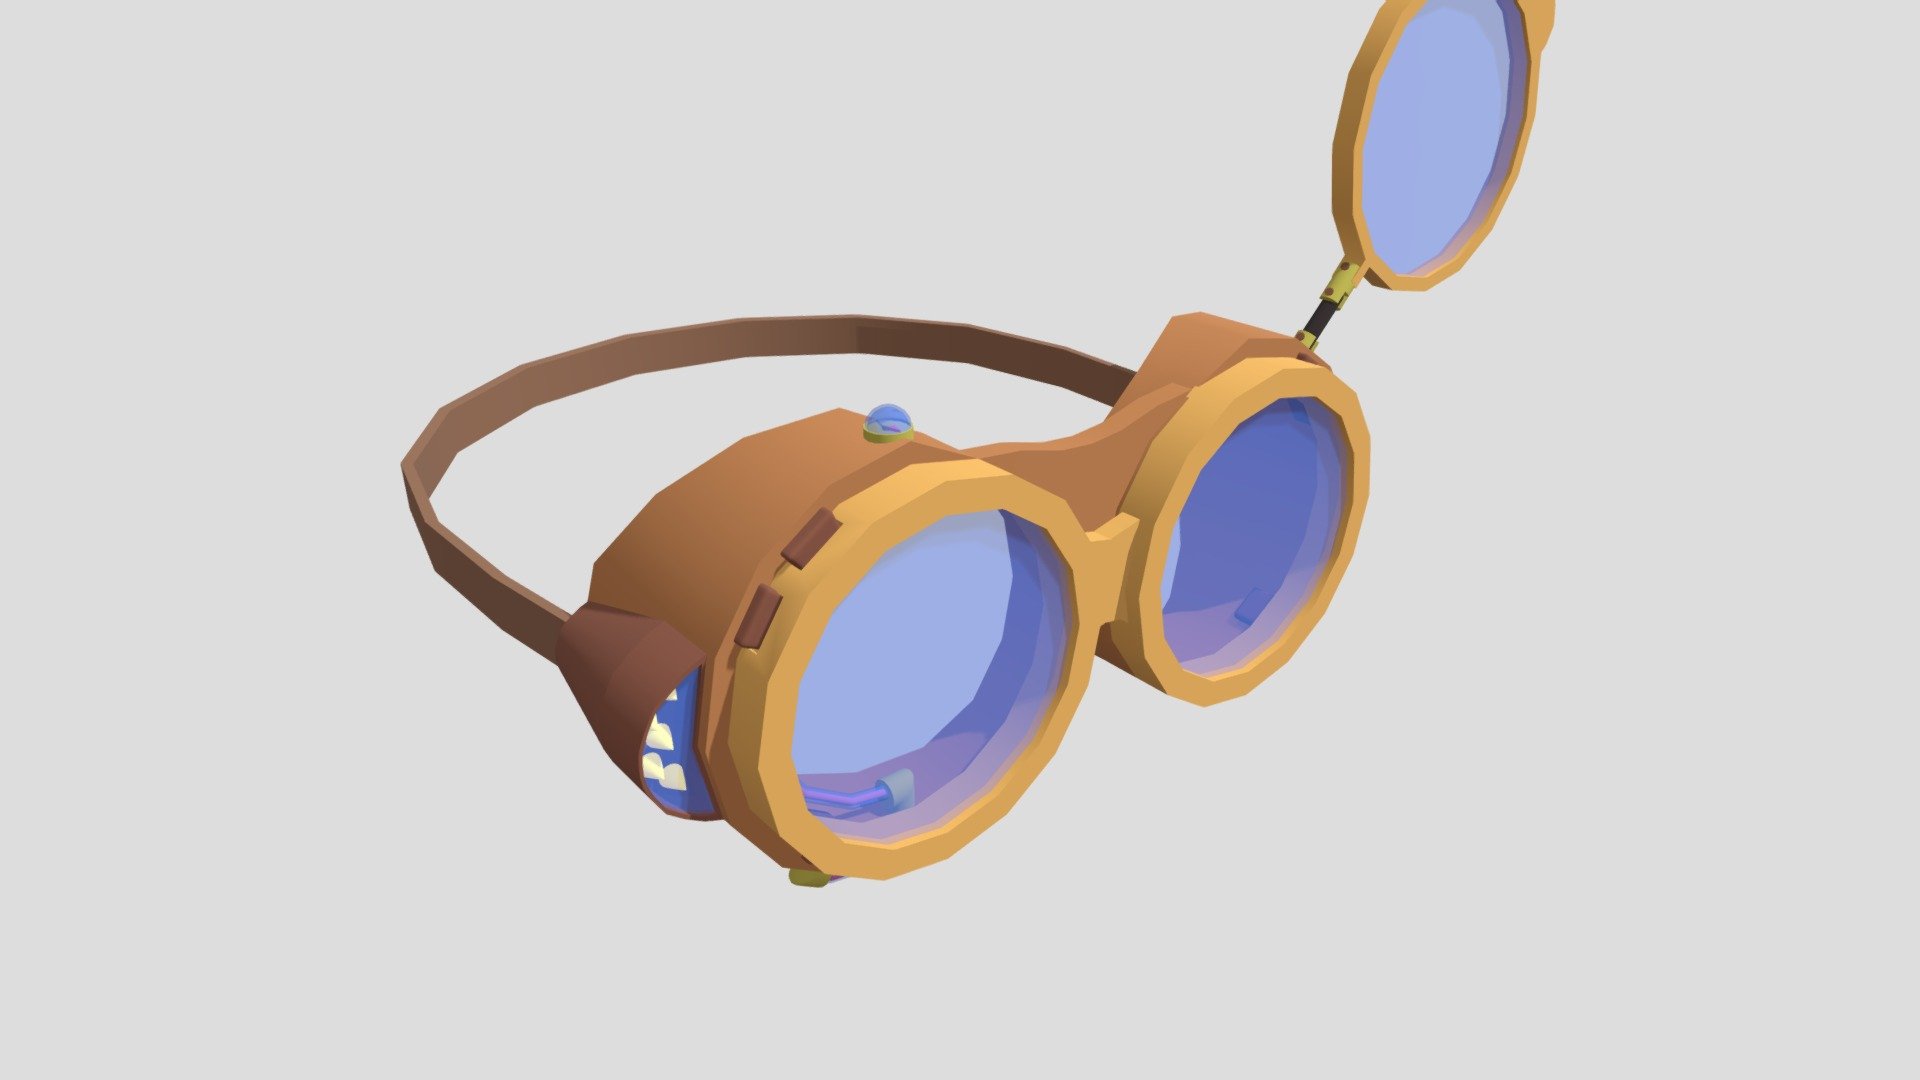 Working towards more steampunk styles. These goggles could be used by an artificer or explorer.

Has Headlamps on the sides to help explore caves or inspect artifacts.

On the Left lens there is a spare lens attachment to let the wearer add various attachments. (Magnifier lens, Light filter, Range Finder, ,or any amount of magical scrying lenses)
On the right lens the two attached instruments are a thermometer, barometer or other measurement instruments, alongside a compass mounted on the top - Explorer Goggles - Download Free 3D model by Anthony.Do 3d model